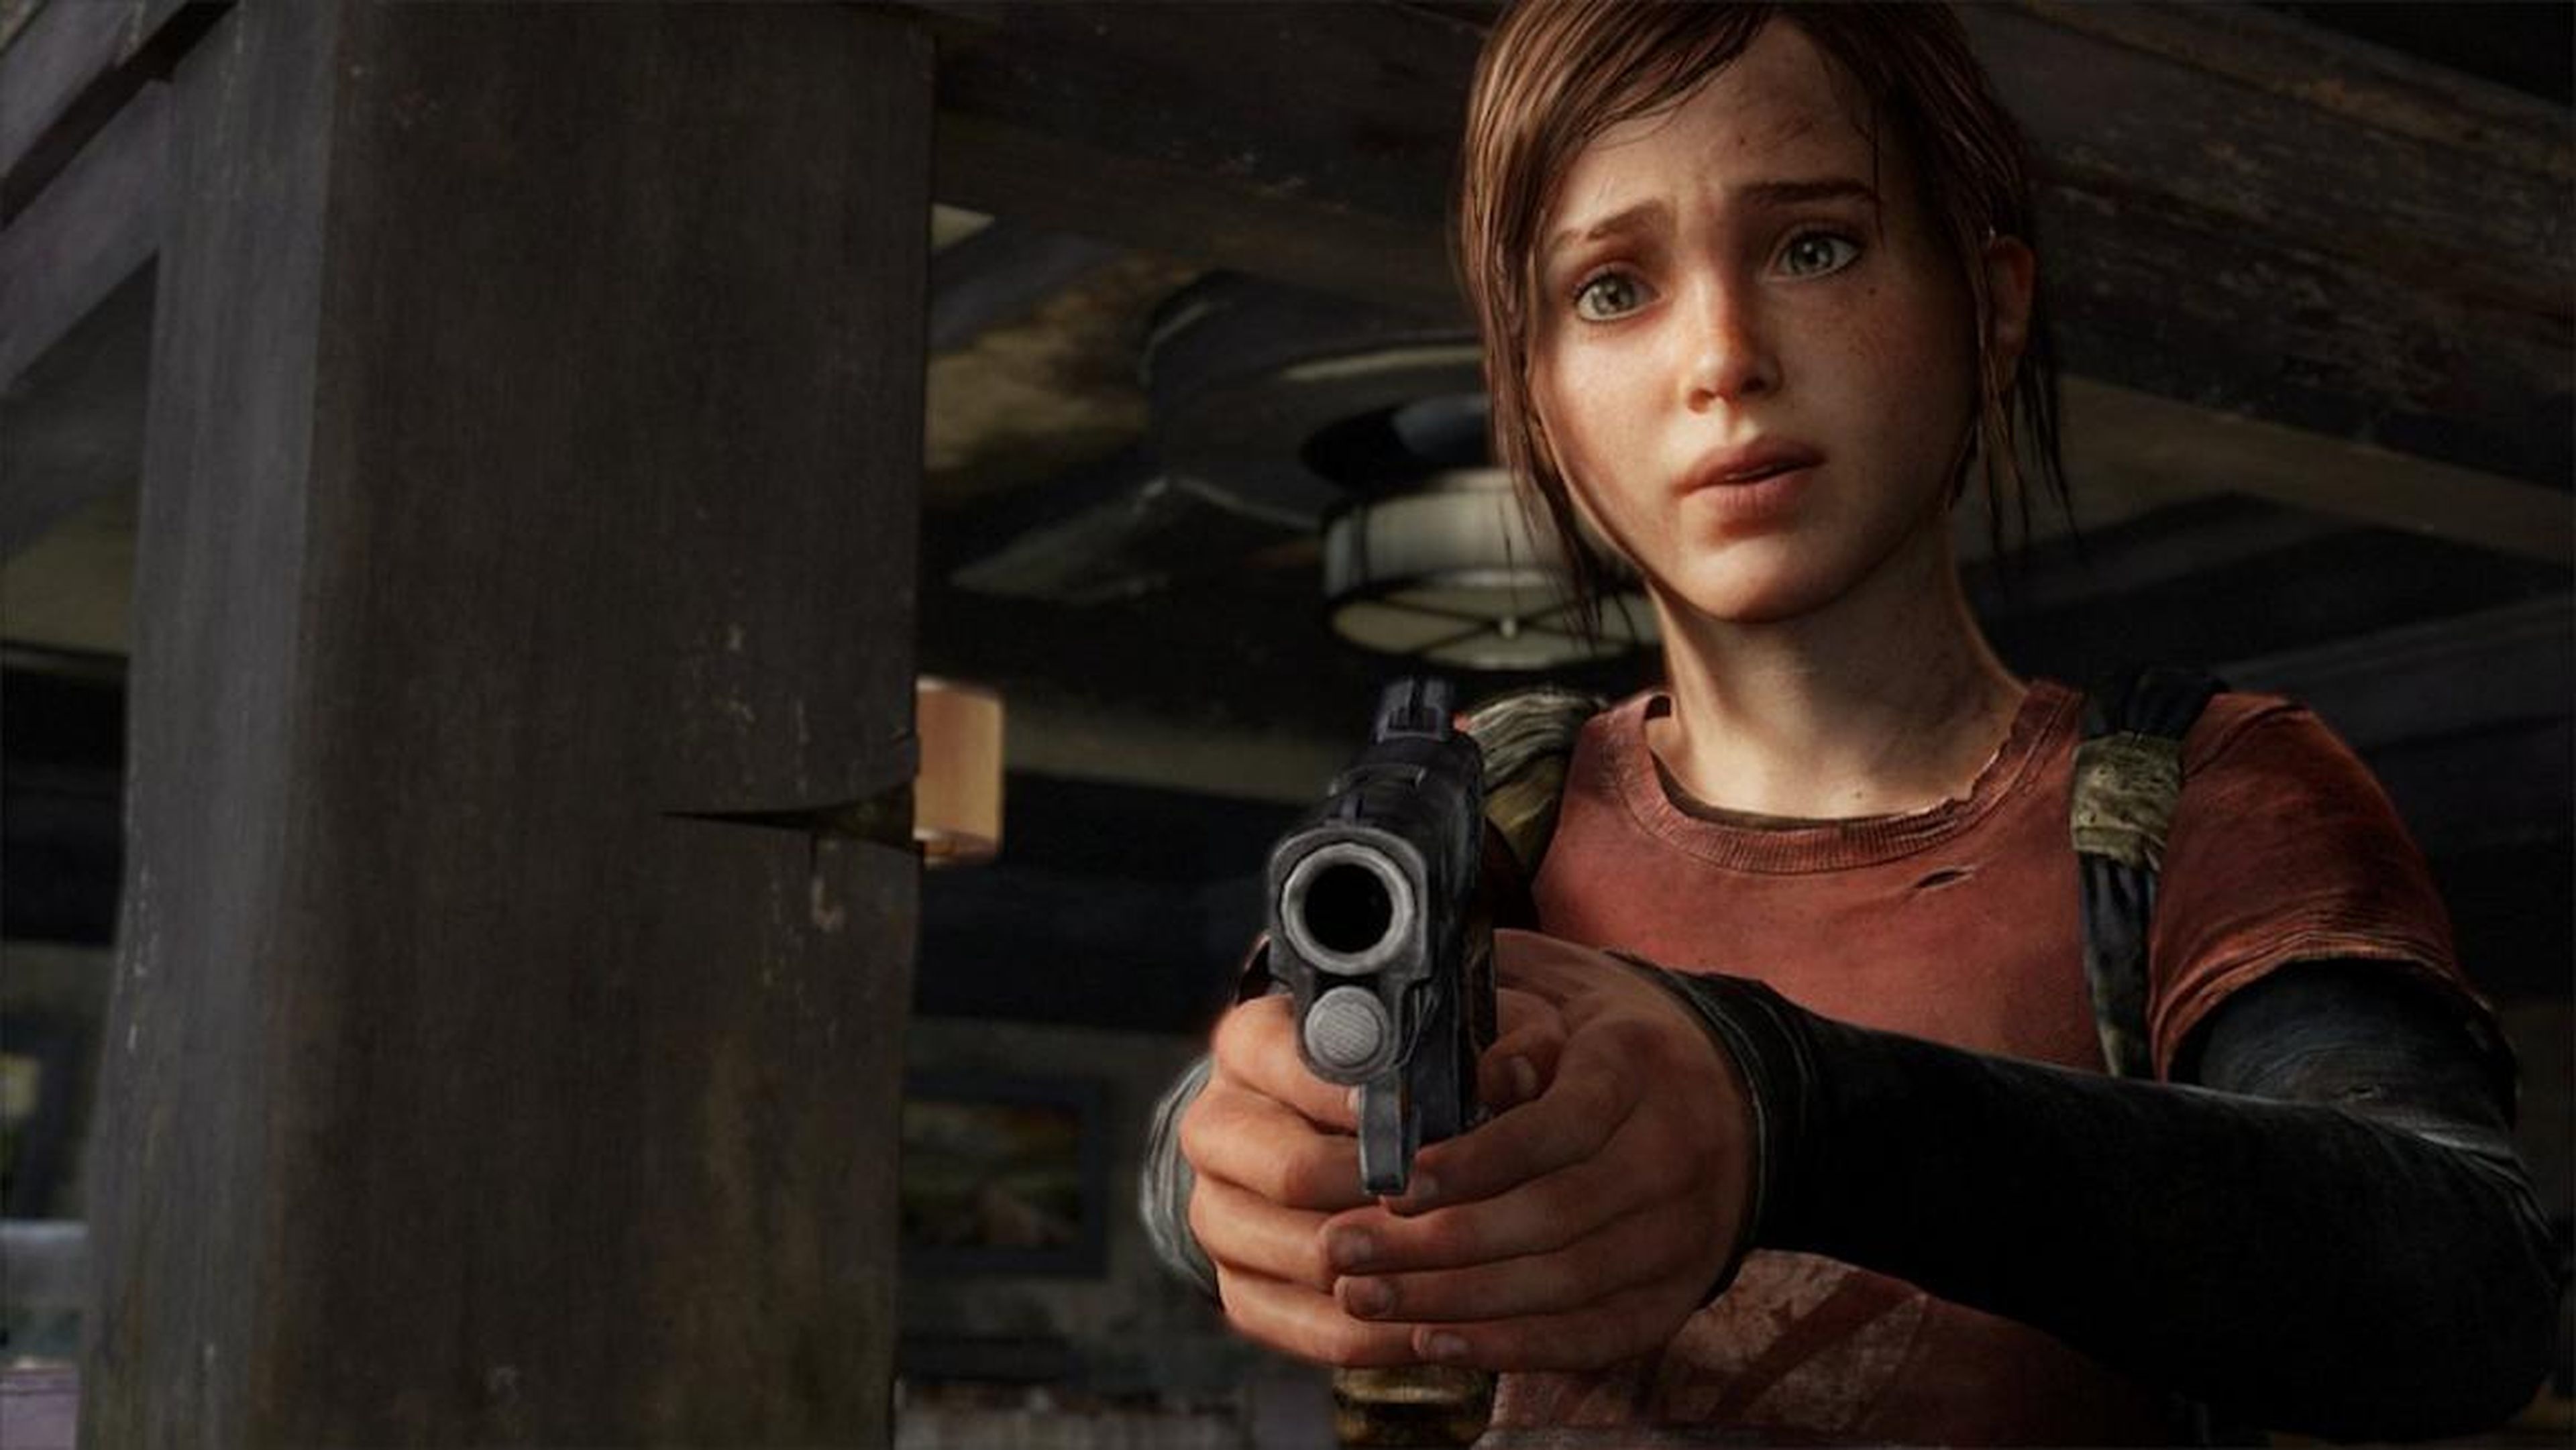 3. "The Last of Us: Remastered"